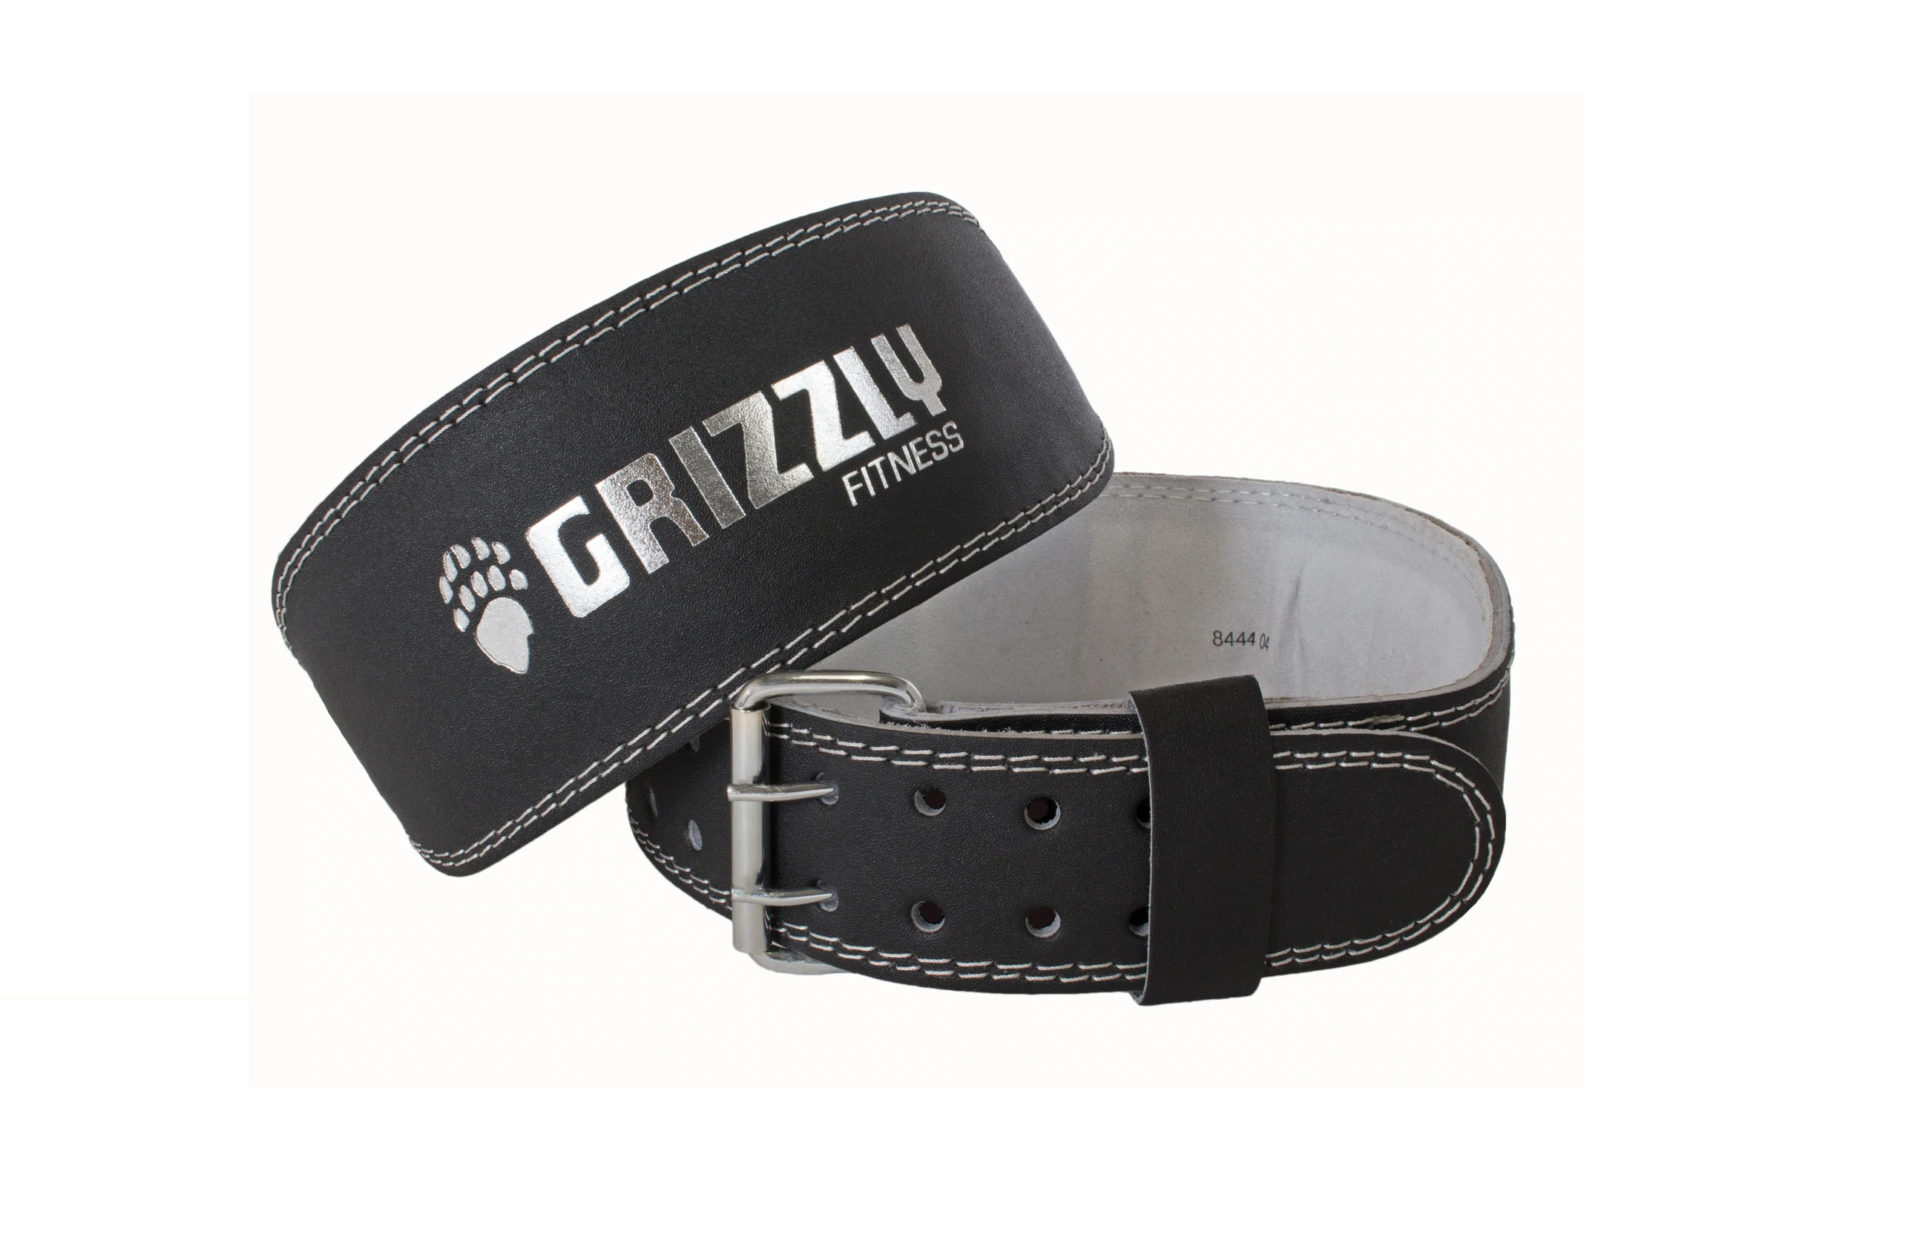 https://yourfitnesssolutions.ca/wp-content/uploads/2021/11/Grizzly-leather-belts.jpg